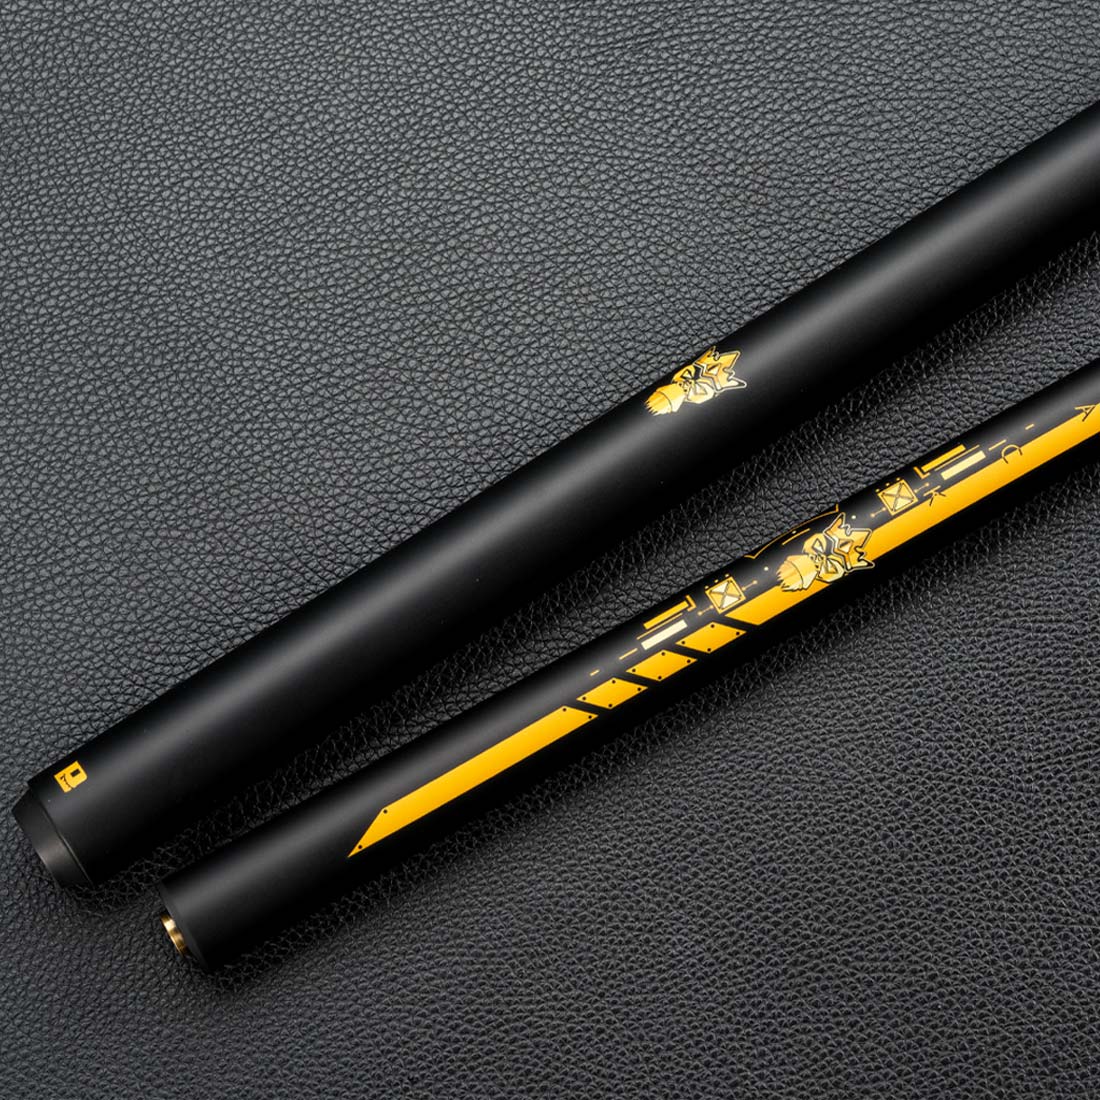 NEW Little Monster Carbon Punch Jump Cue